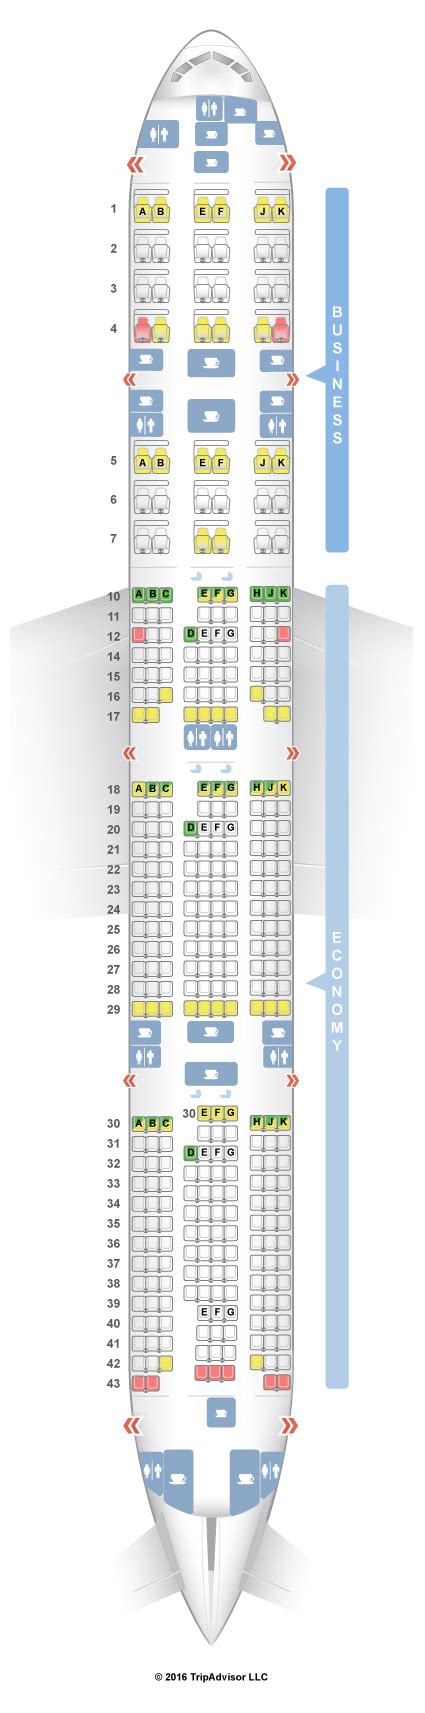 Seat map for qatar airways. Qatar Airways still operates a few Airbus A330-200 aircraft. These are on their way out and will be replaced with newer generation models like the Boeing B787-9 Dreamliner. Qatar Airways has configured their A330-200 in a two class layout for 260 seats. The A330-200 is a modern long haul airliner with a good cargo capacity in the lower deck. 